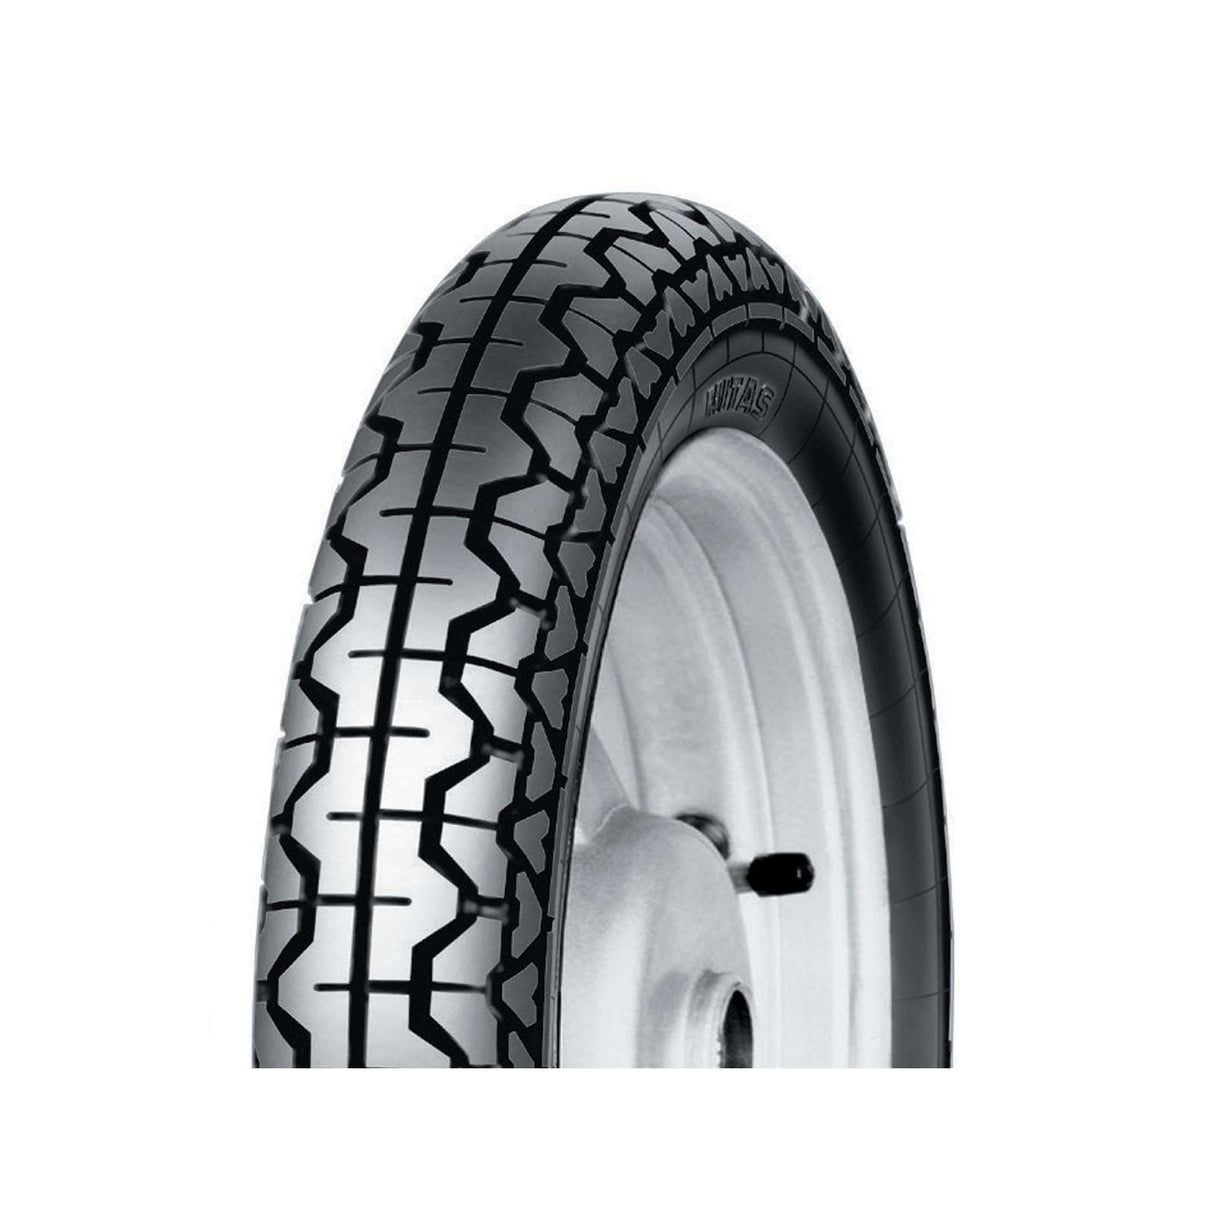 3.25-18 H06 Classic Reinf. Mitas Highway Tyre